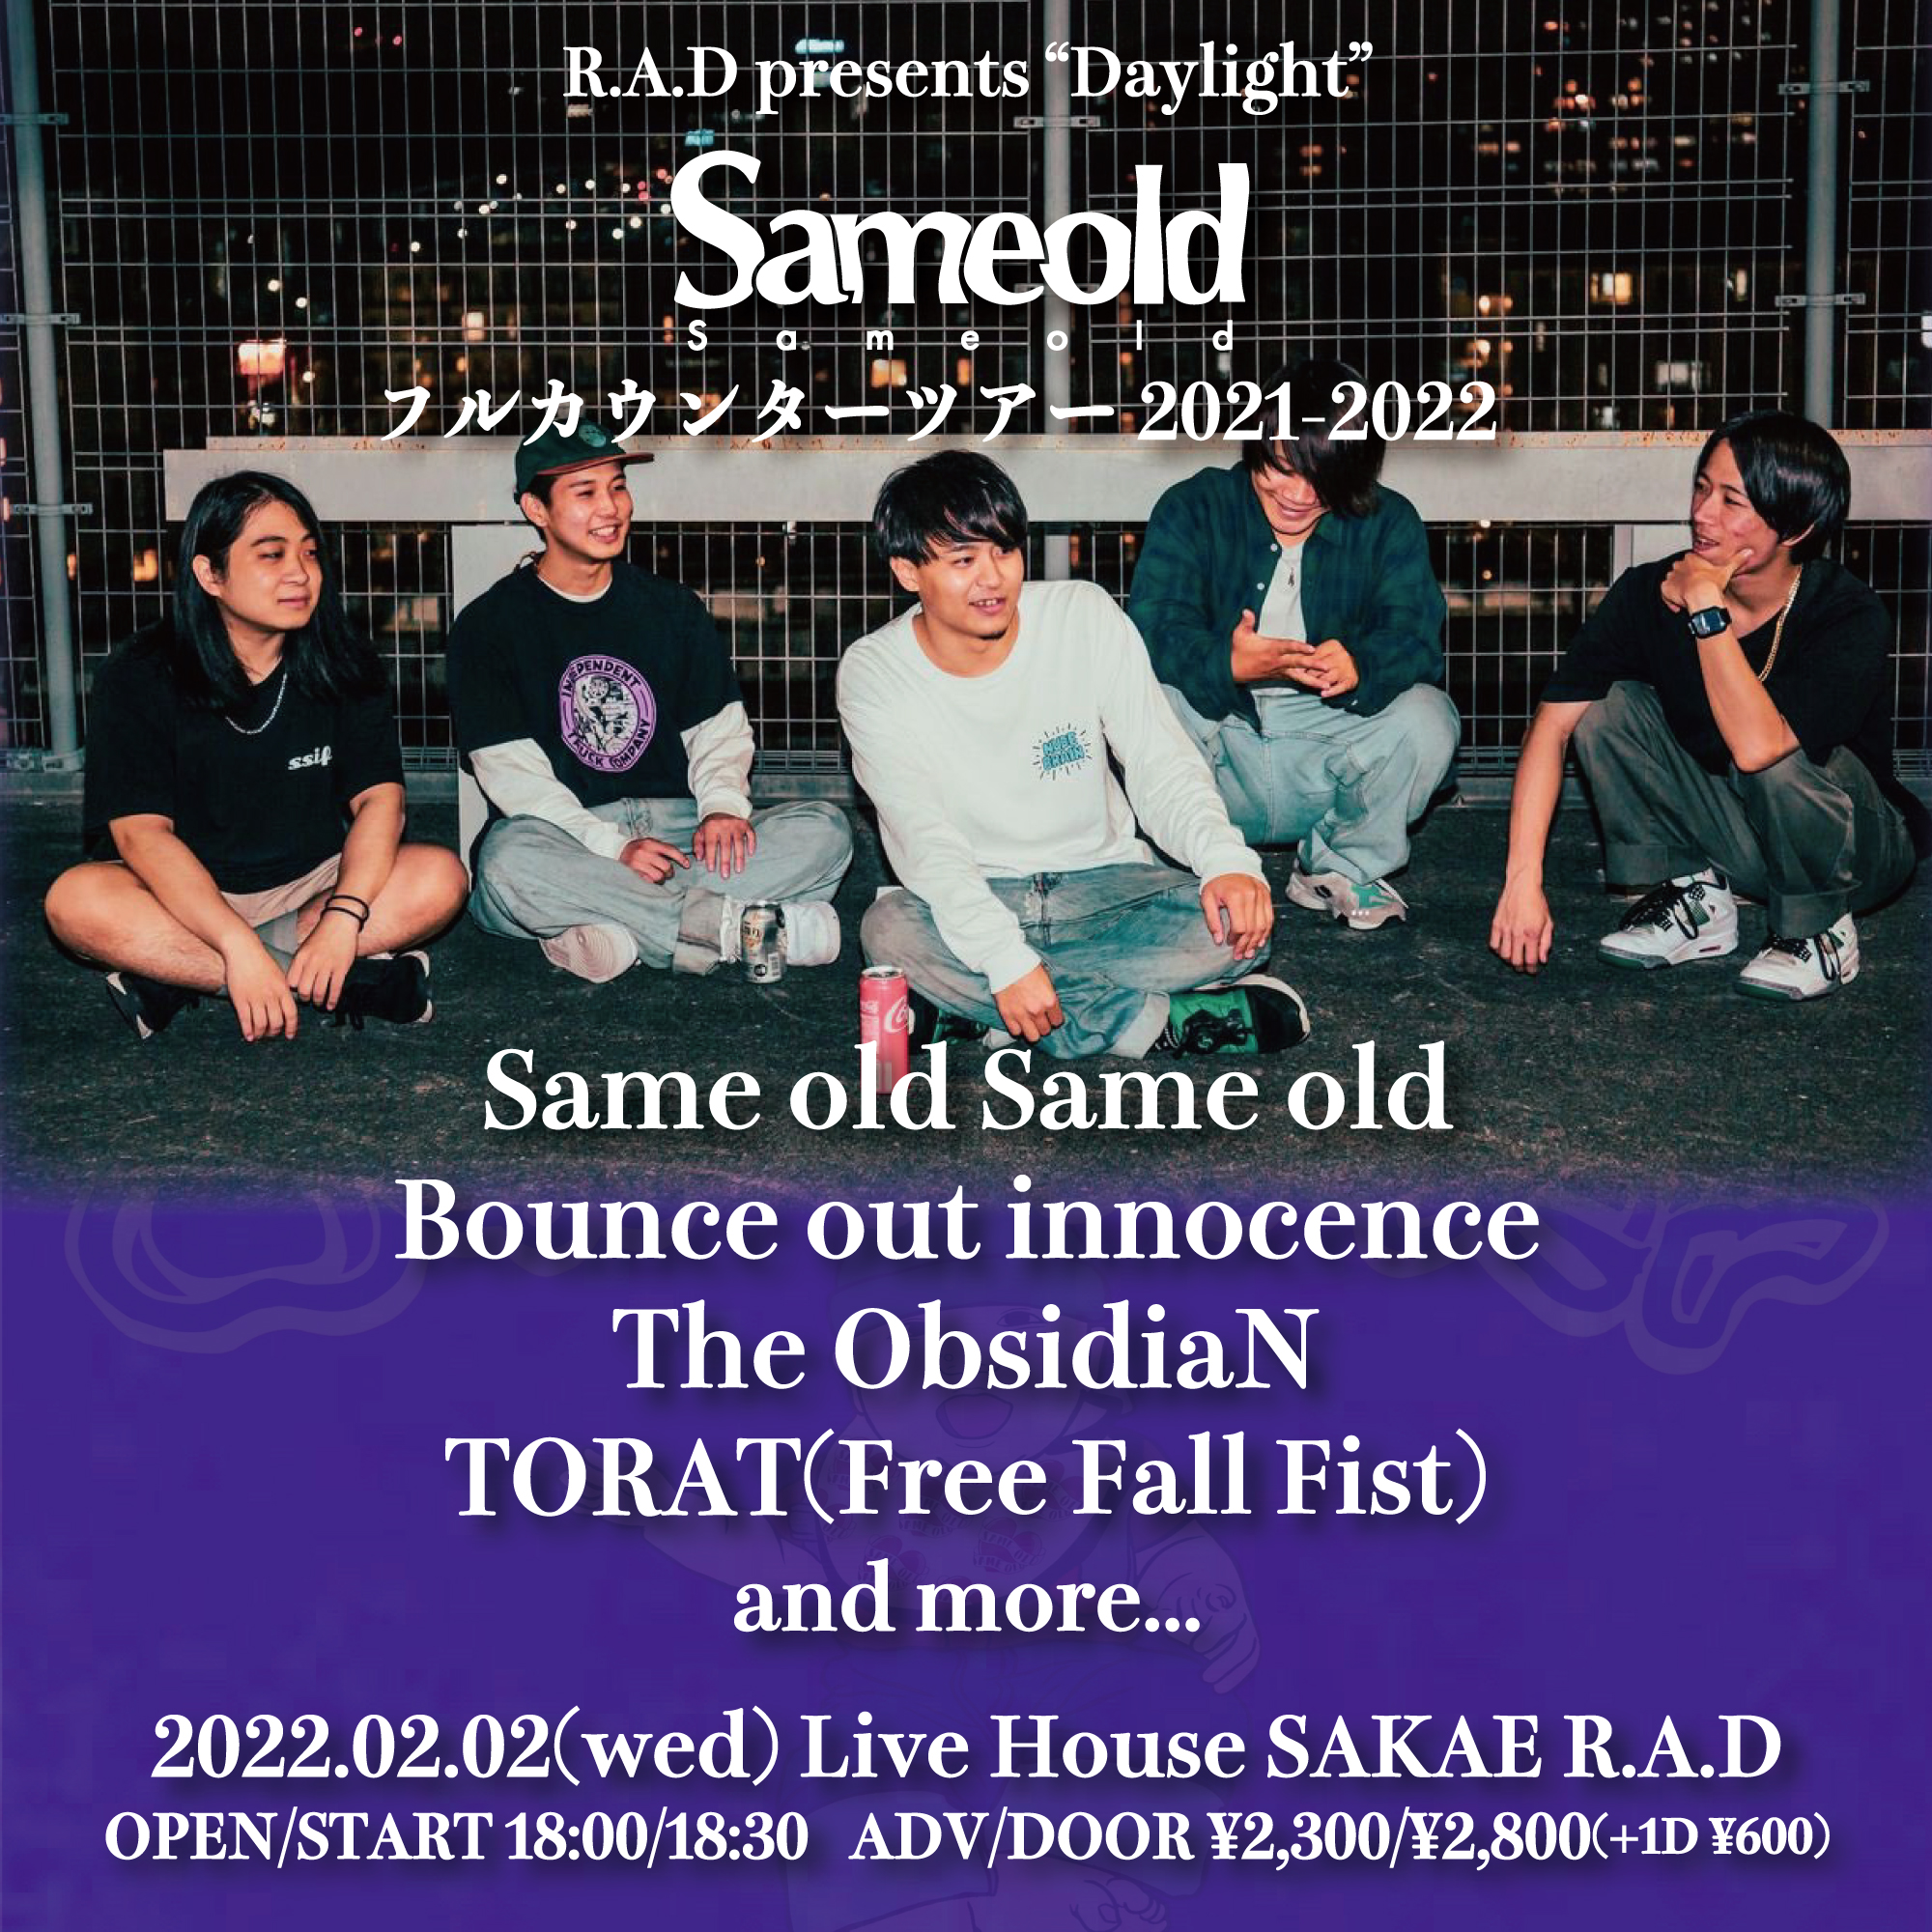 R.A.D presents "Daylight" Same old Same old フルカウンターツアー 2021-2022